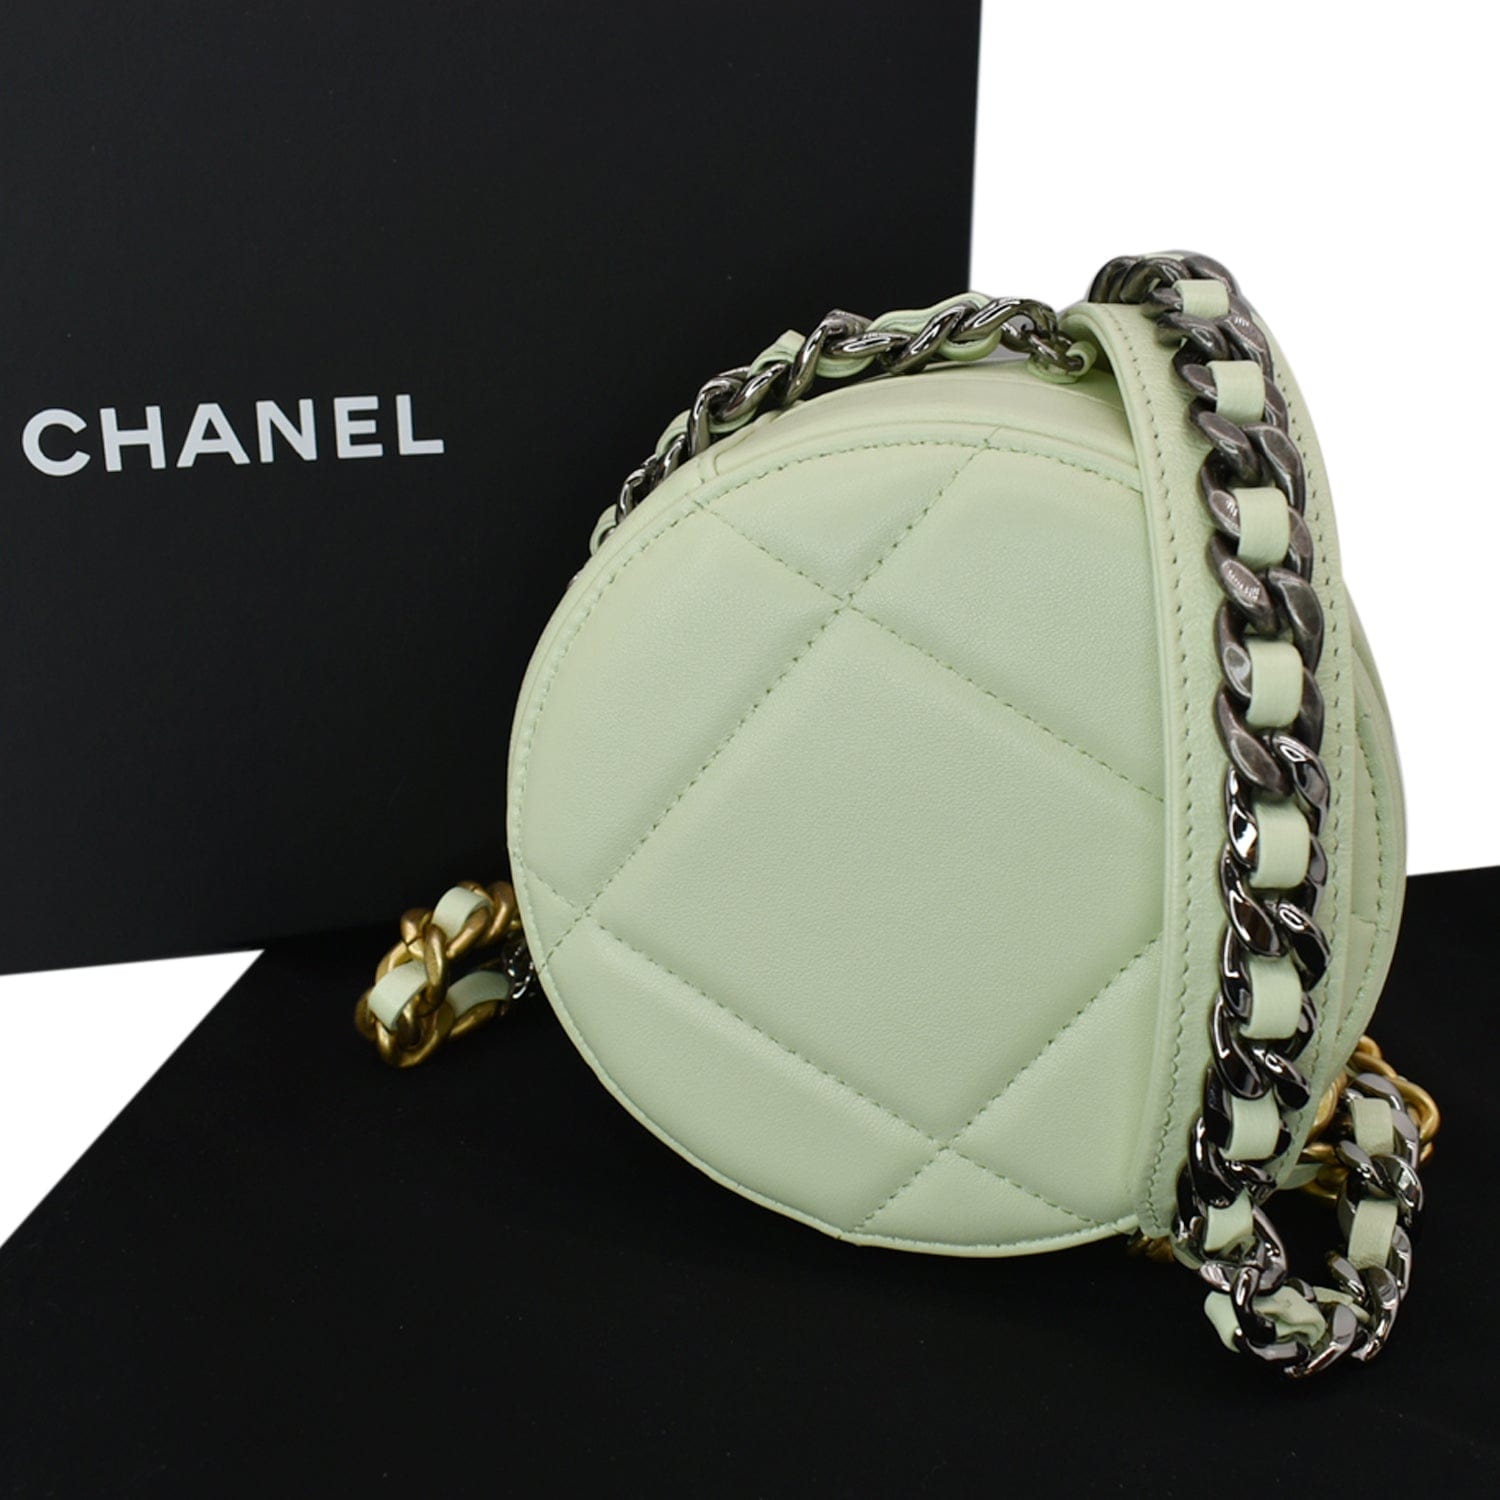 CHANEL 19 Round Clutch Chain Shoulder Bag Leather Silver AP0945